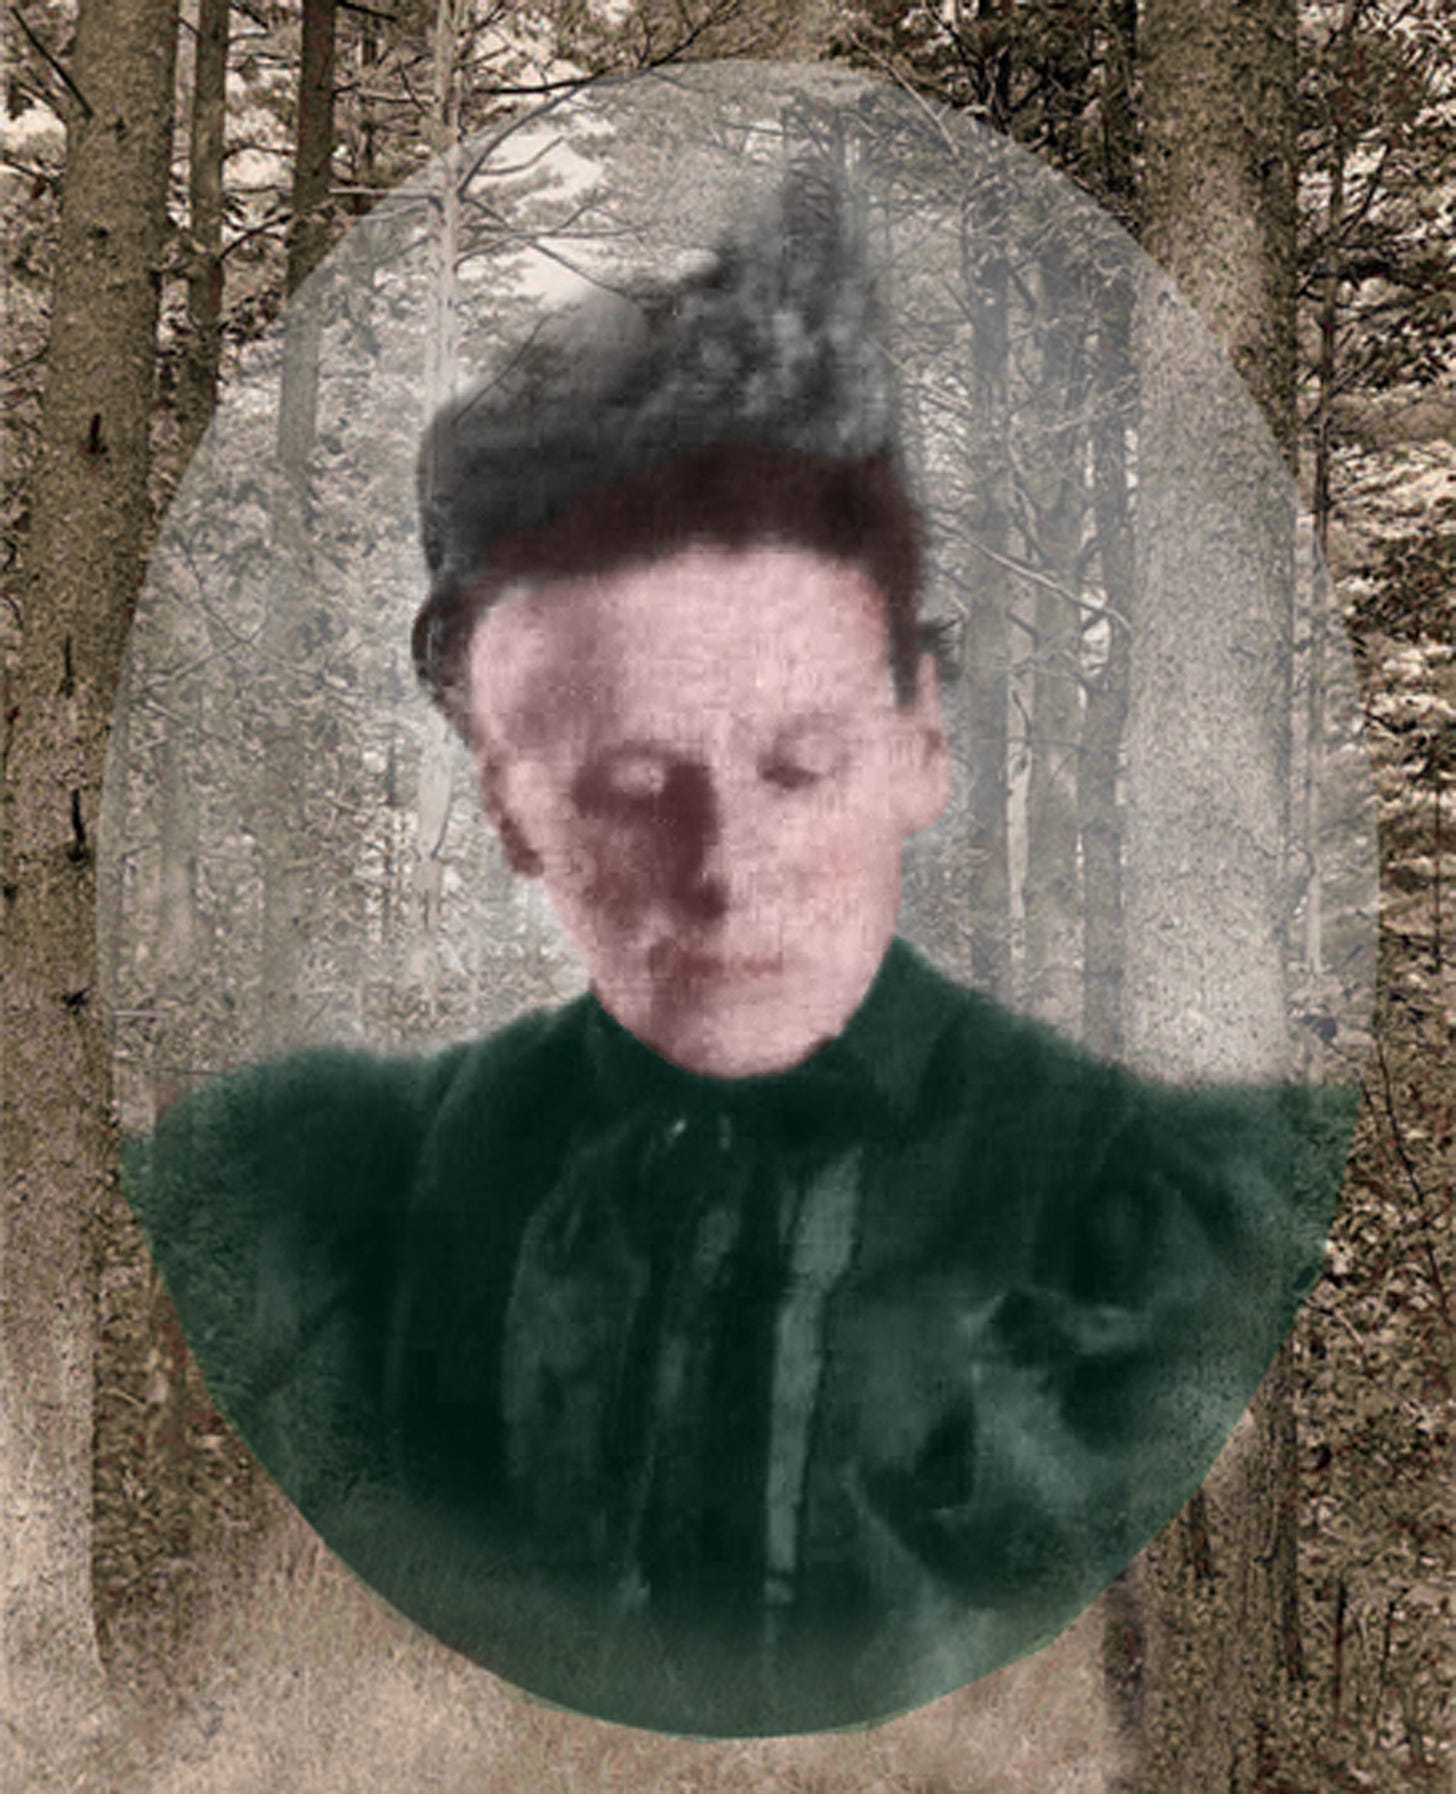 tinted portrait of severe-looking 19th'century woman in high-necked collar and hat with a bird's wing. Set artfully into a historic photo of a pine forest